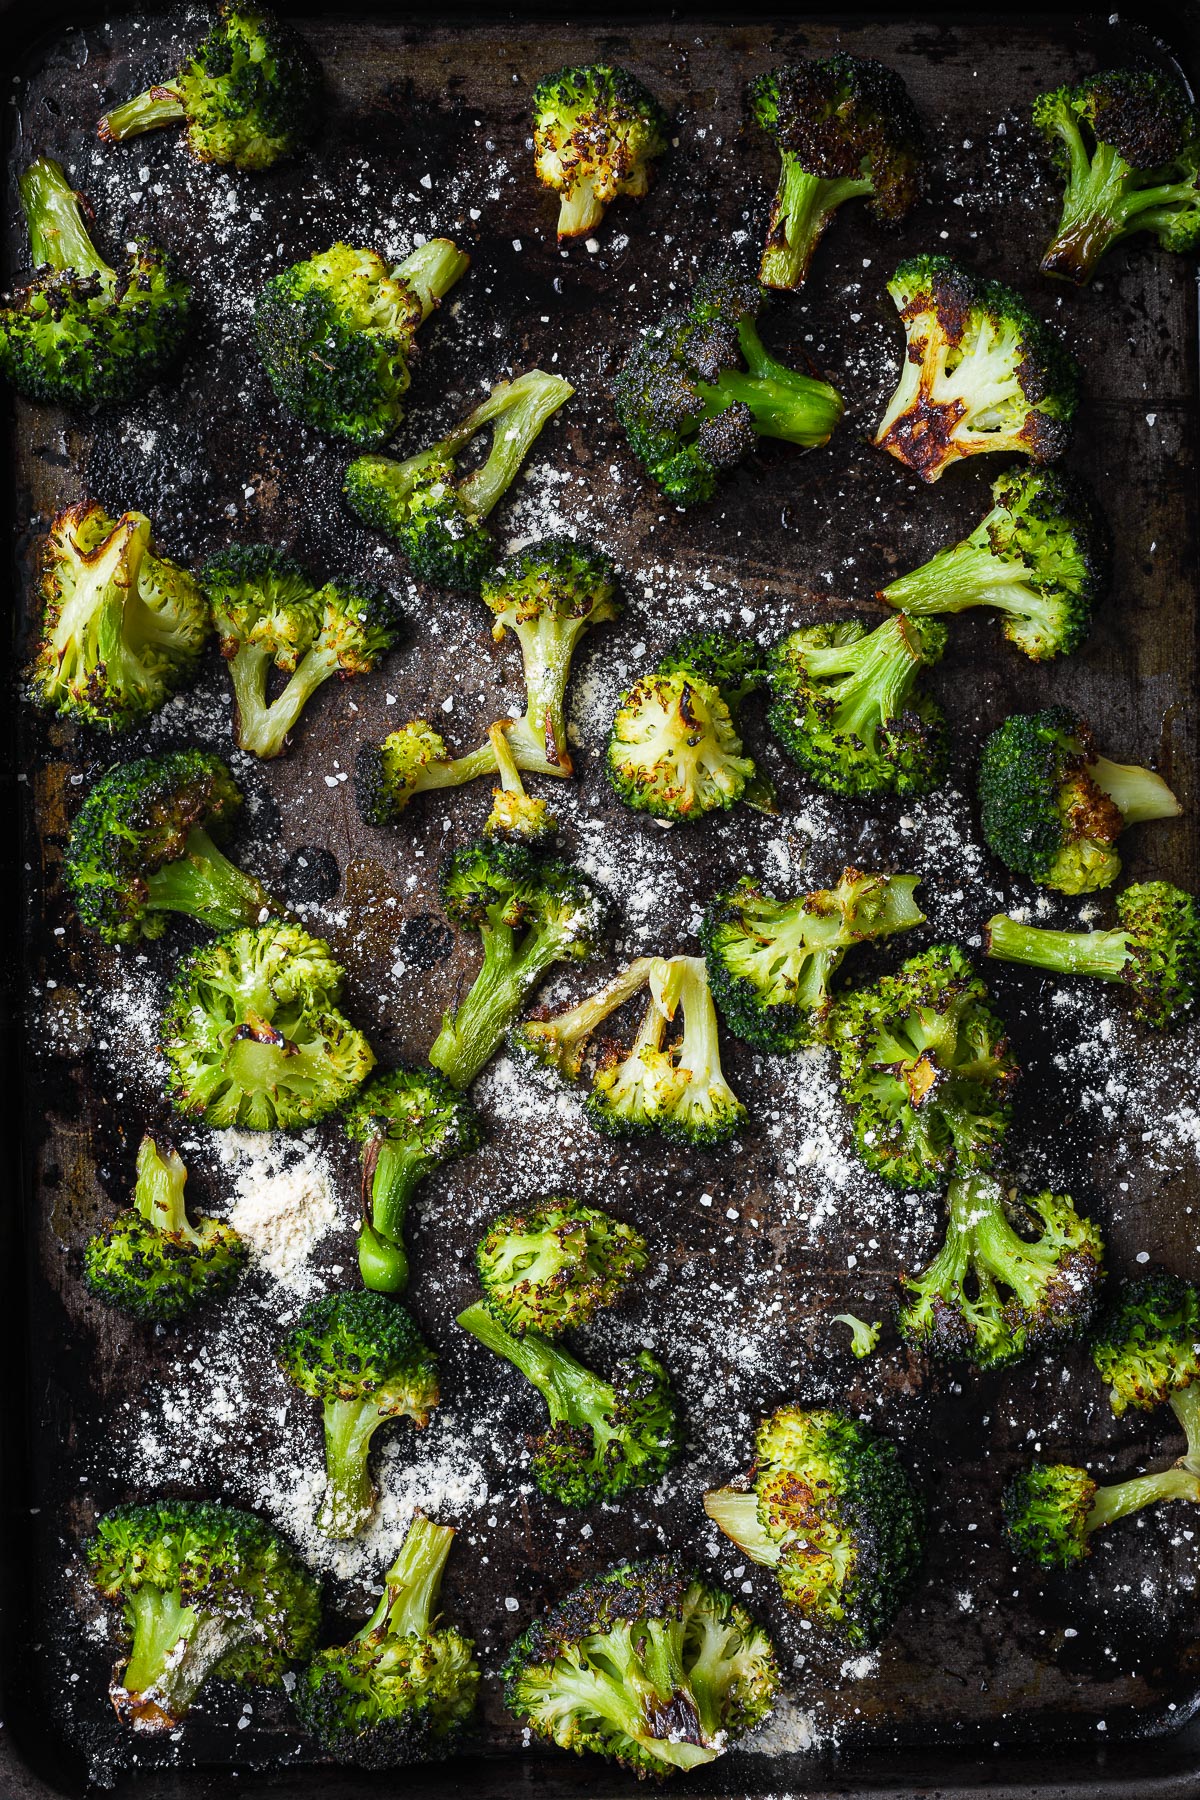 Oven-roasted frozen broccoli sprinkled with garlic salt on a baking sheet viewed from above.